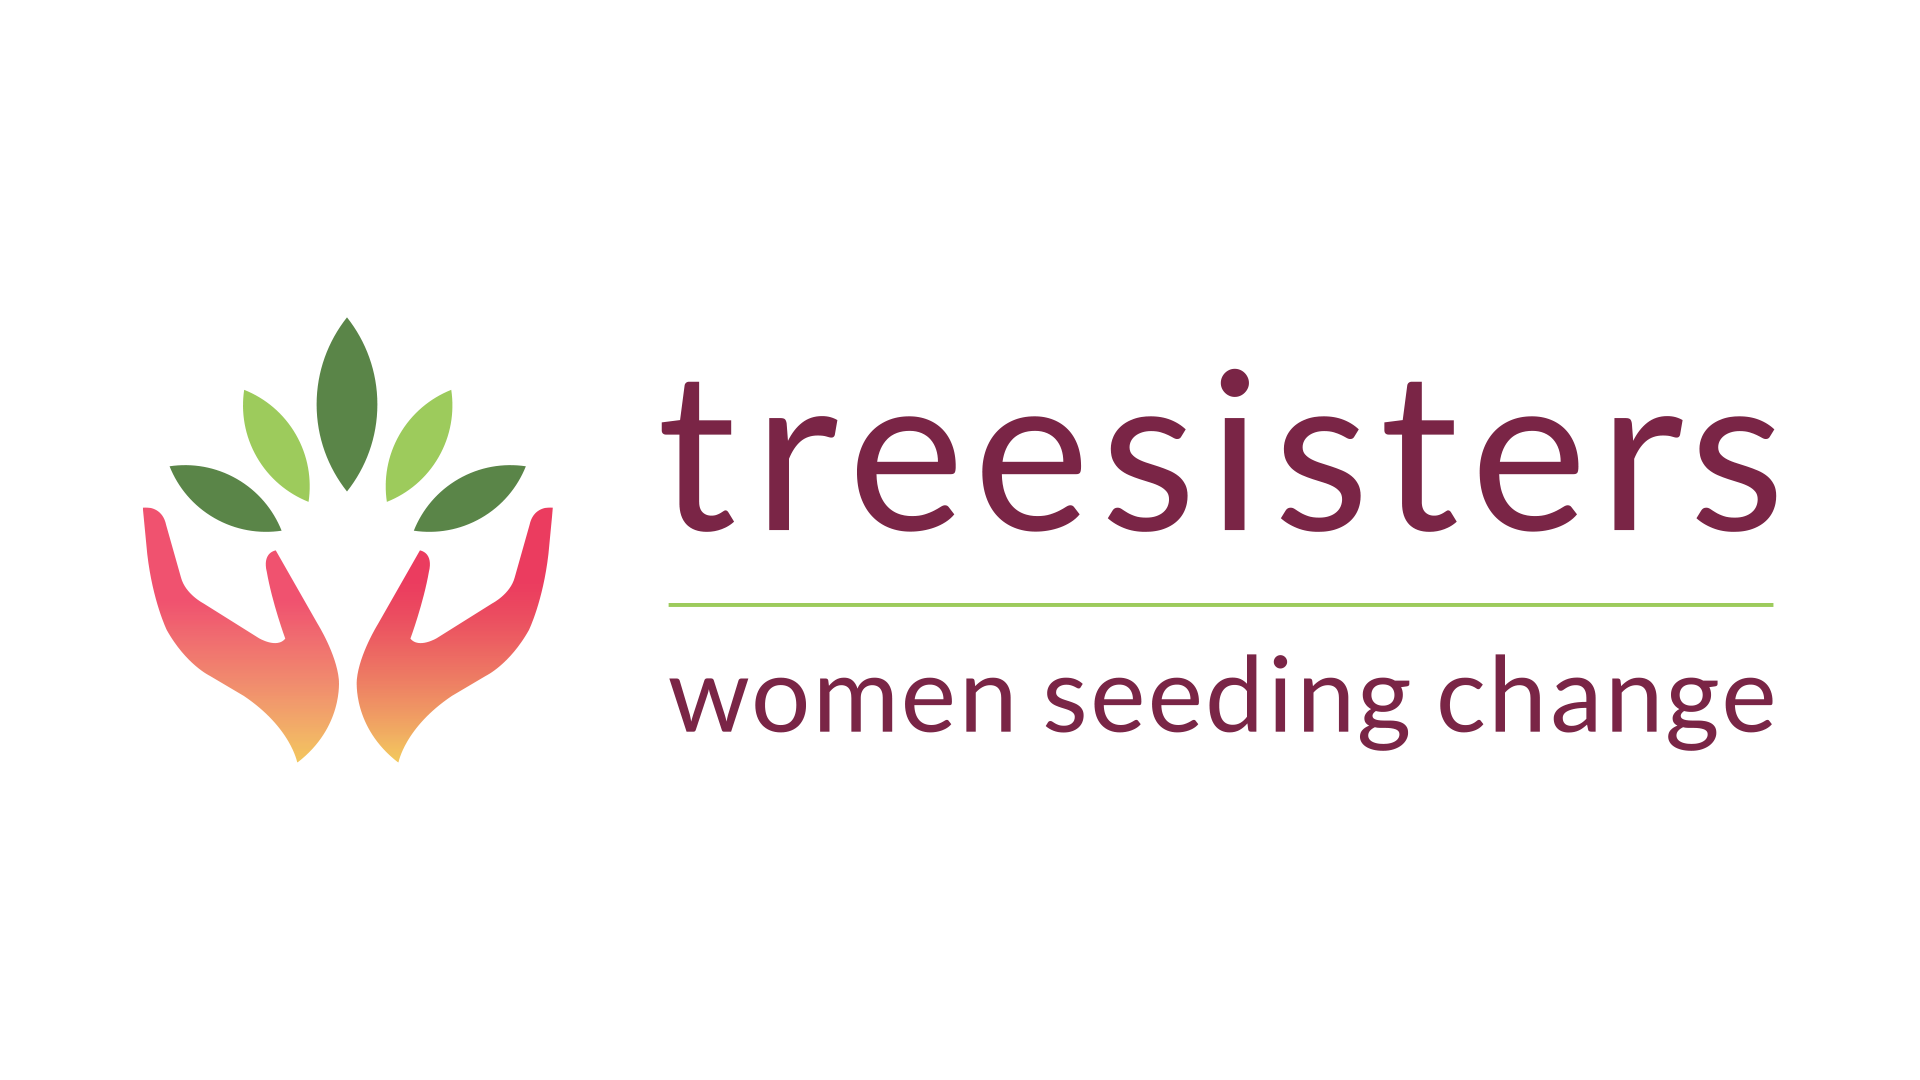 TreeSisters_logo_receivedJuly2018